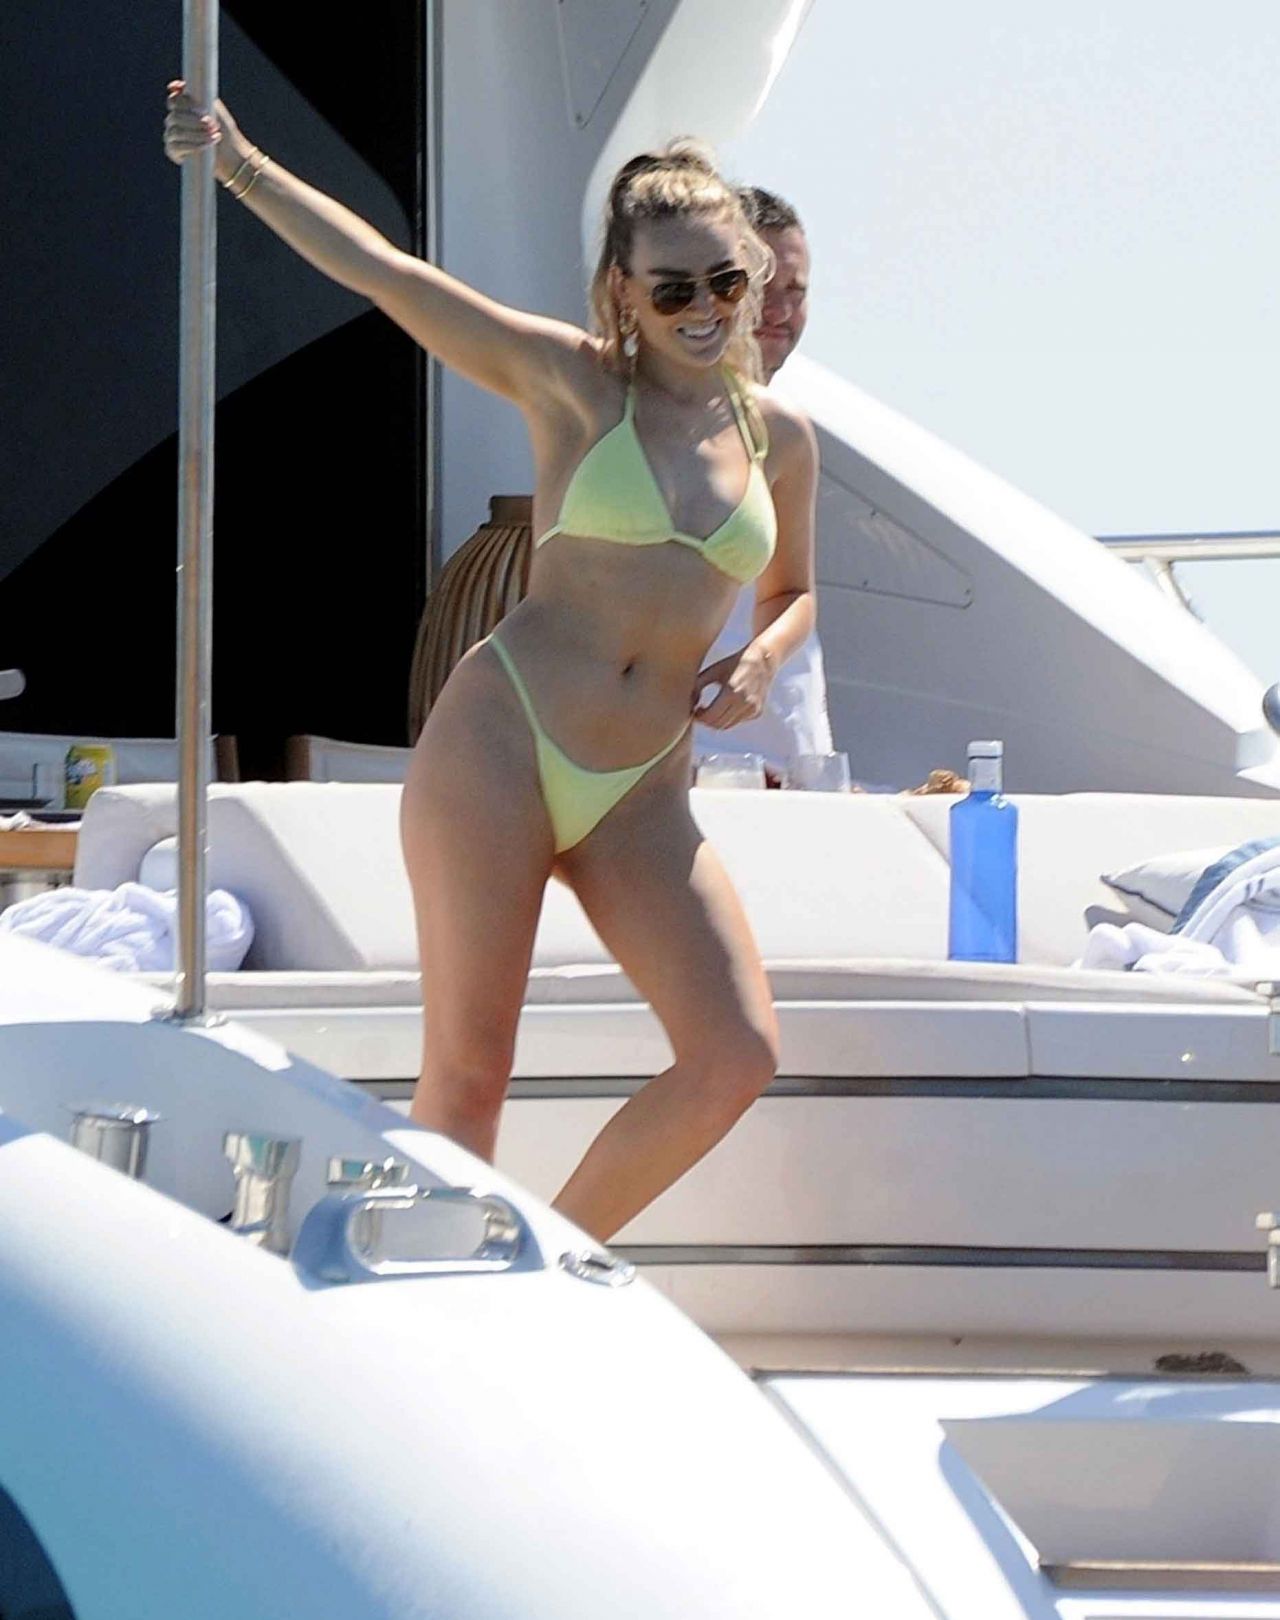 perrie-edwards-and-alex-oxlade-chamberlain-holiday-in-ibiza-06-05-2019-4.jpg